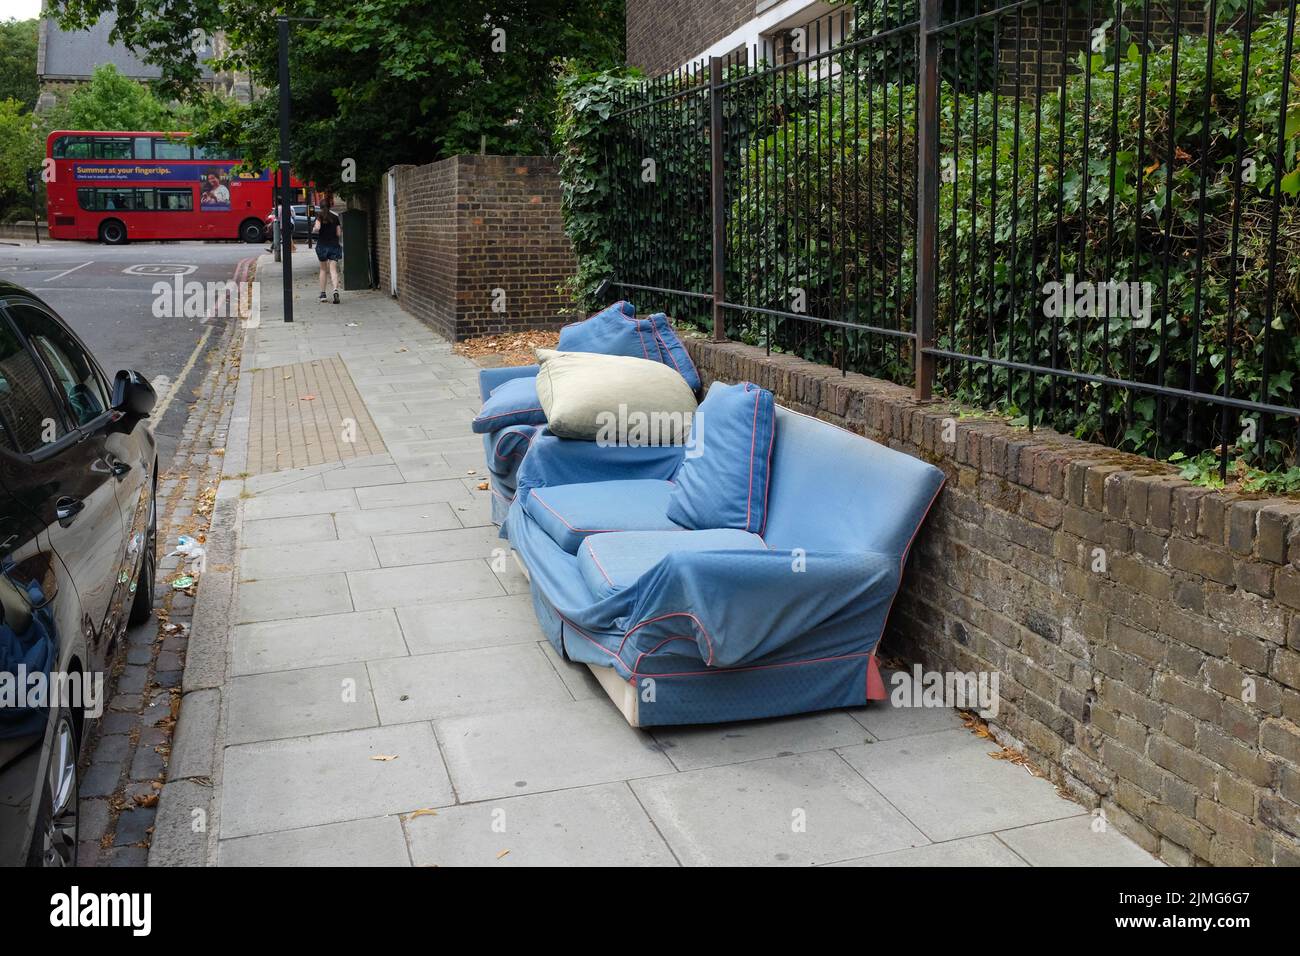 A dumped sofa on the streets of south London, England. Stock Photo